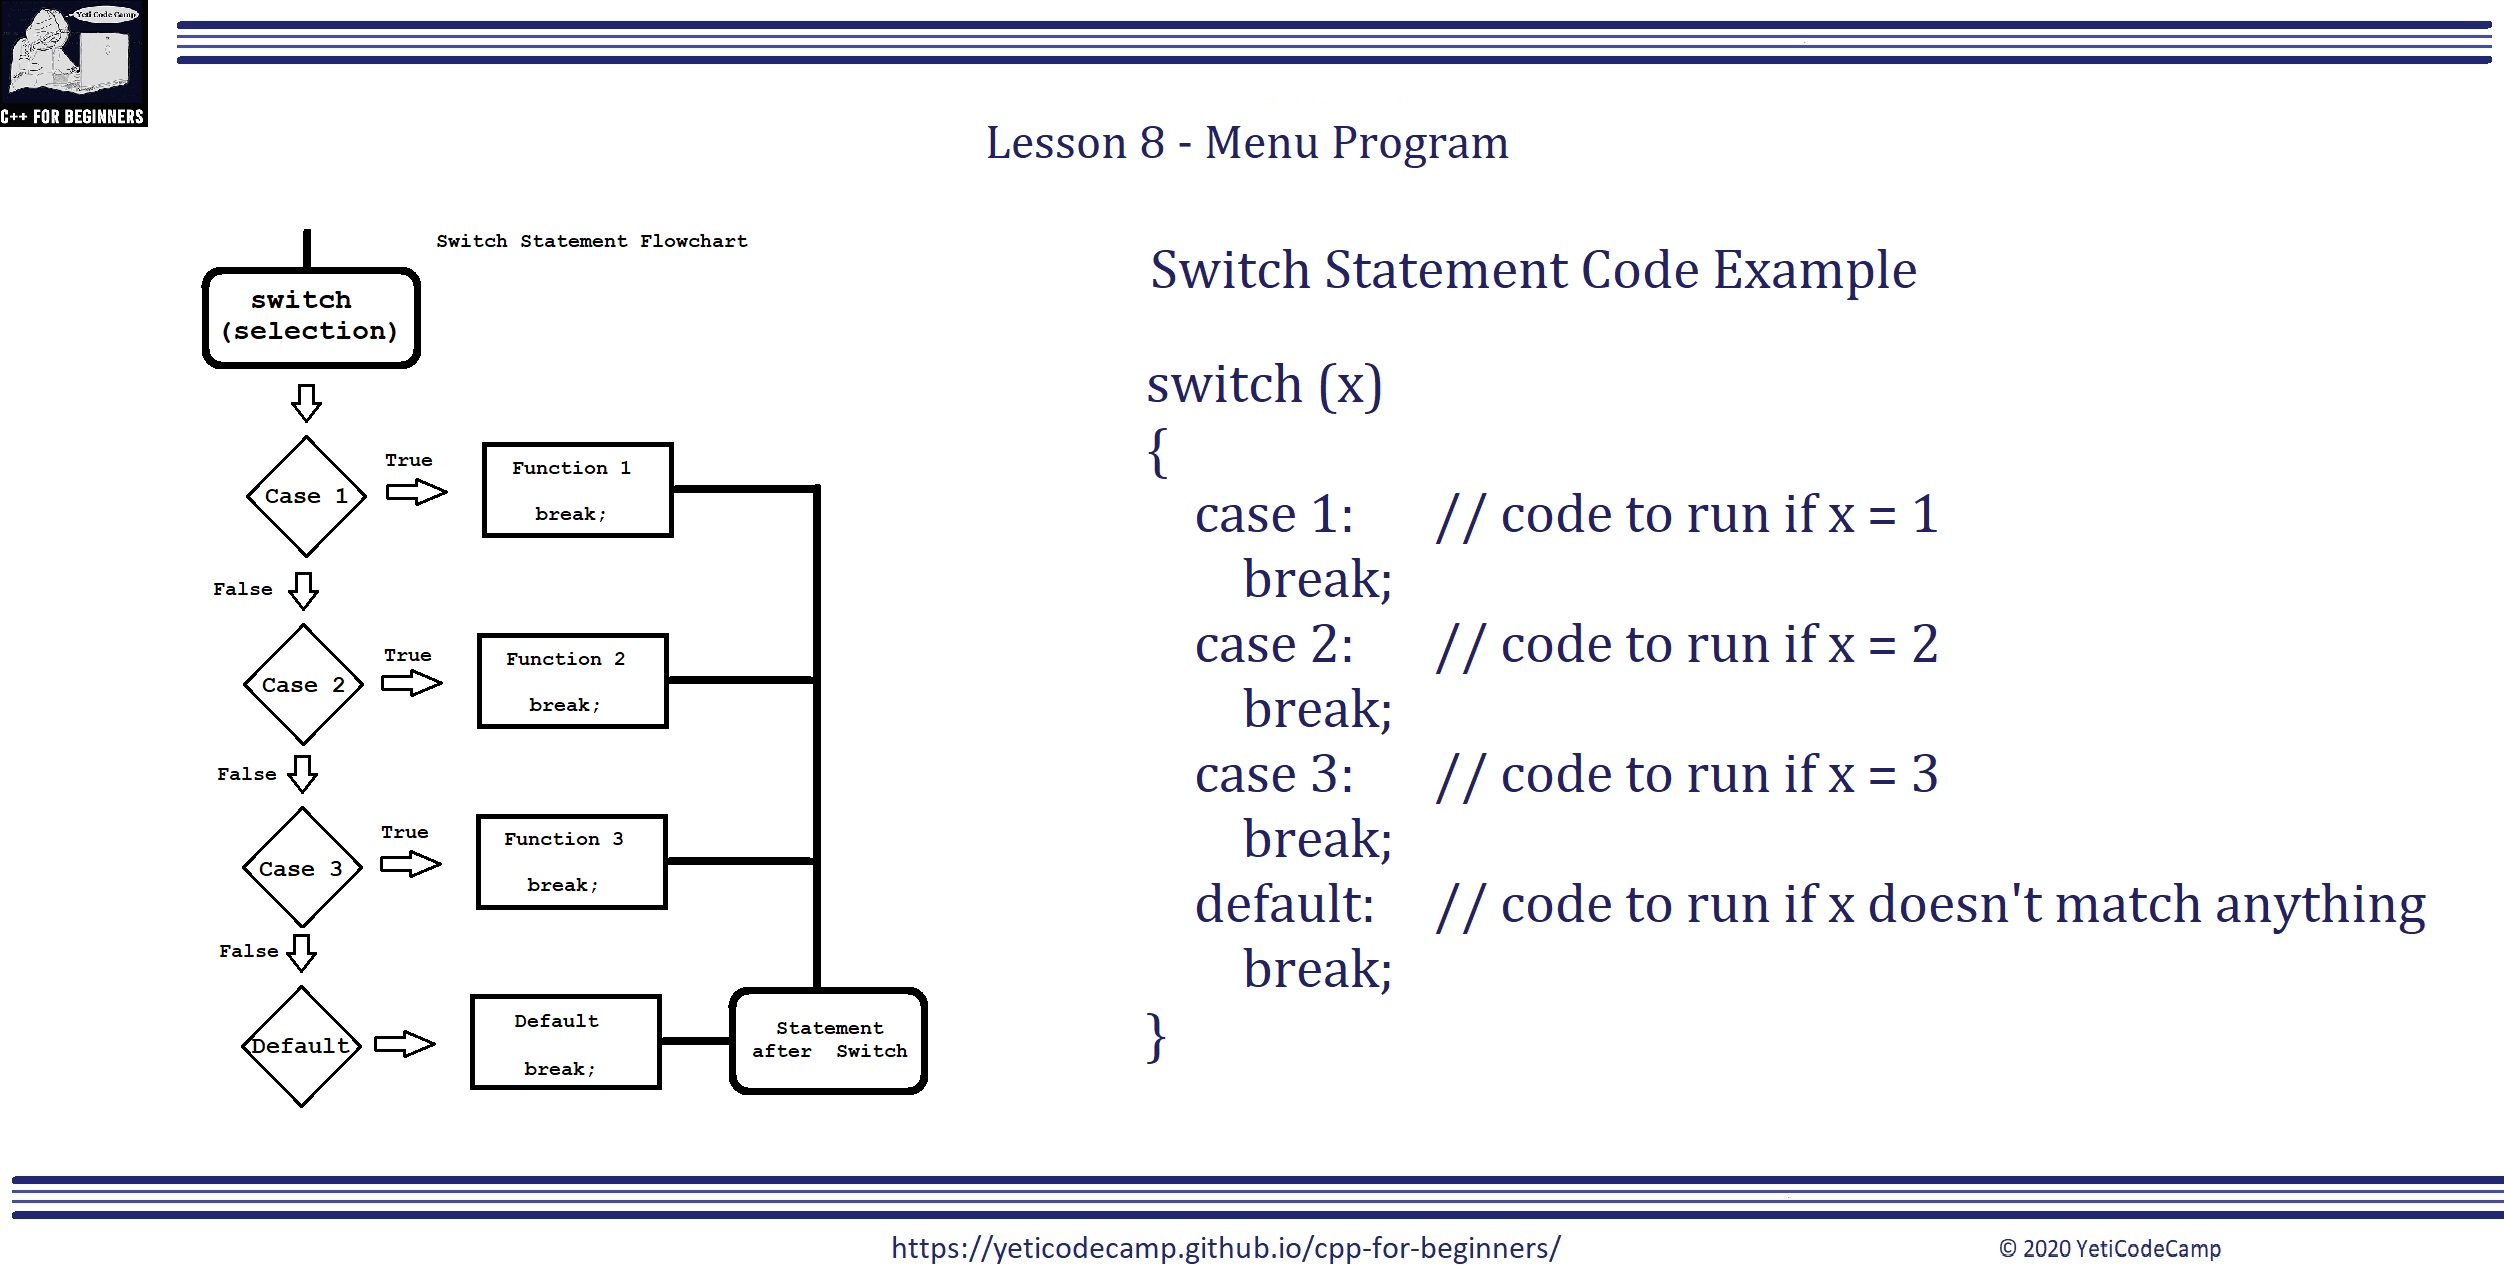 Switch Statement Overview